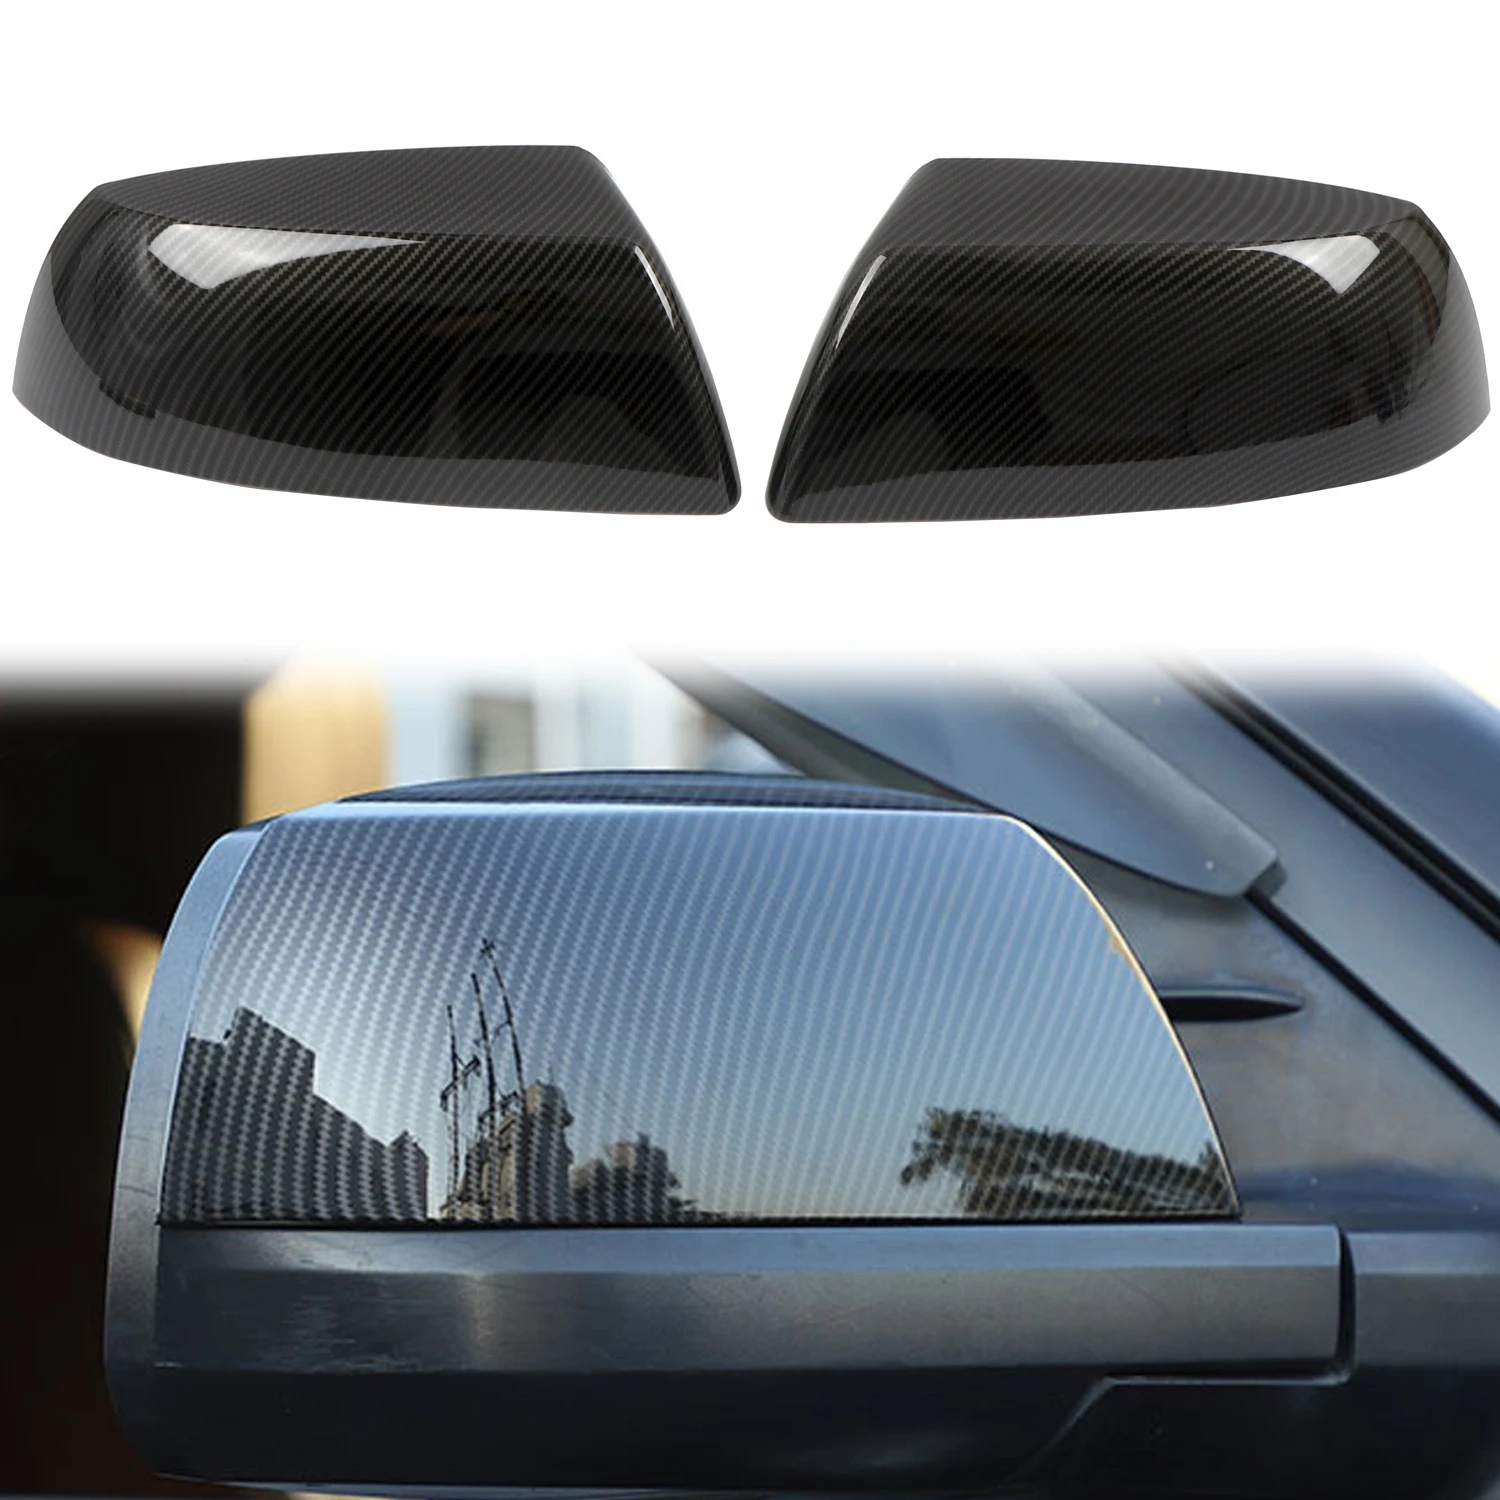 

For Toyota Tundra 2014 2015 2016 2017 2018 2019 Carbon Fiber Style Rearview Mirror Cover Side Wing Rear View Mirror Case Covers